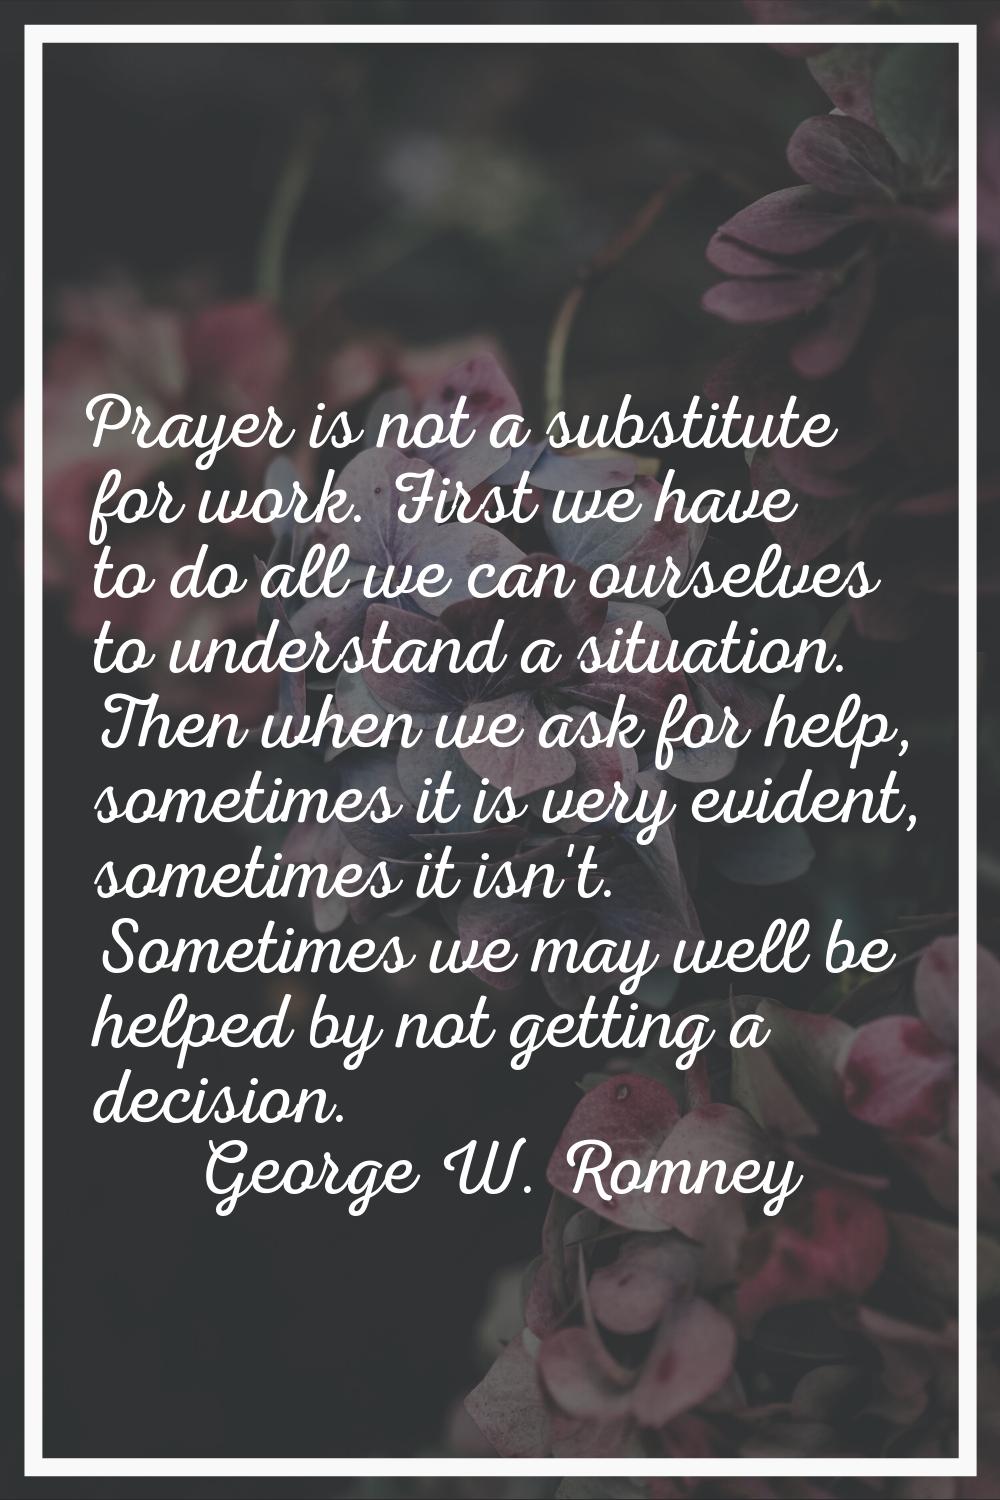 Prayer is not a substitute for work. First we have to do all we can ourselves to understand a situa